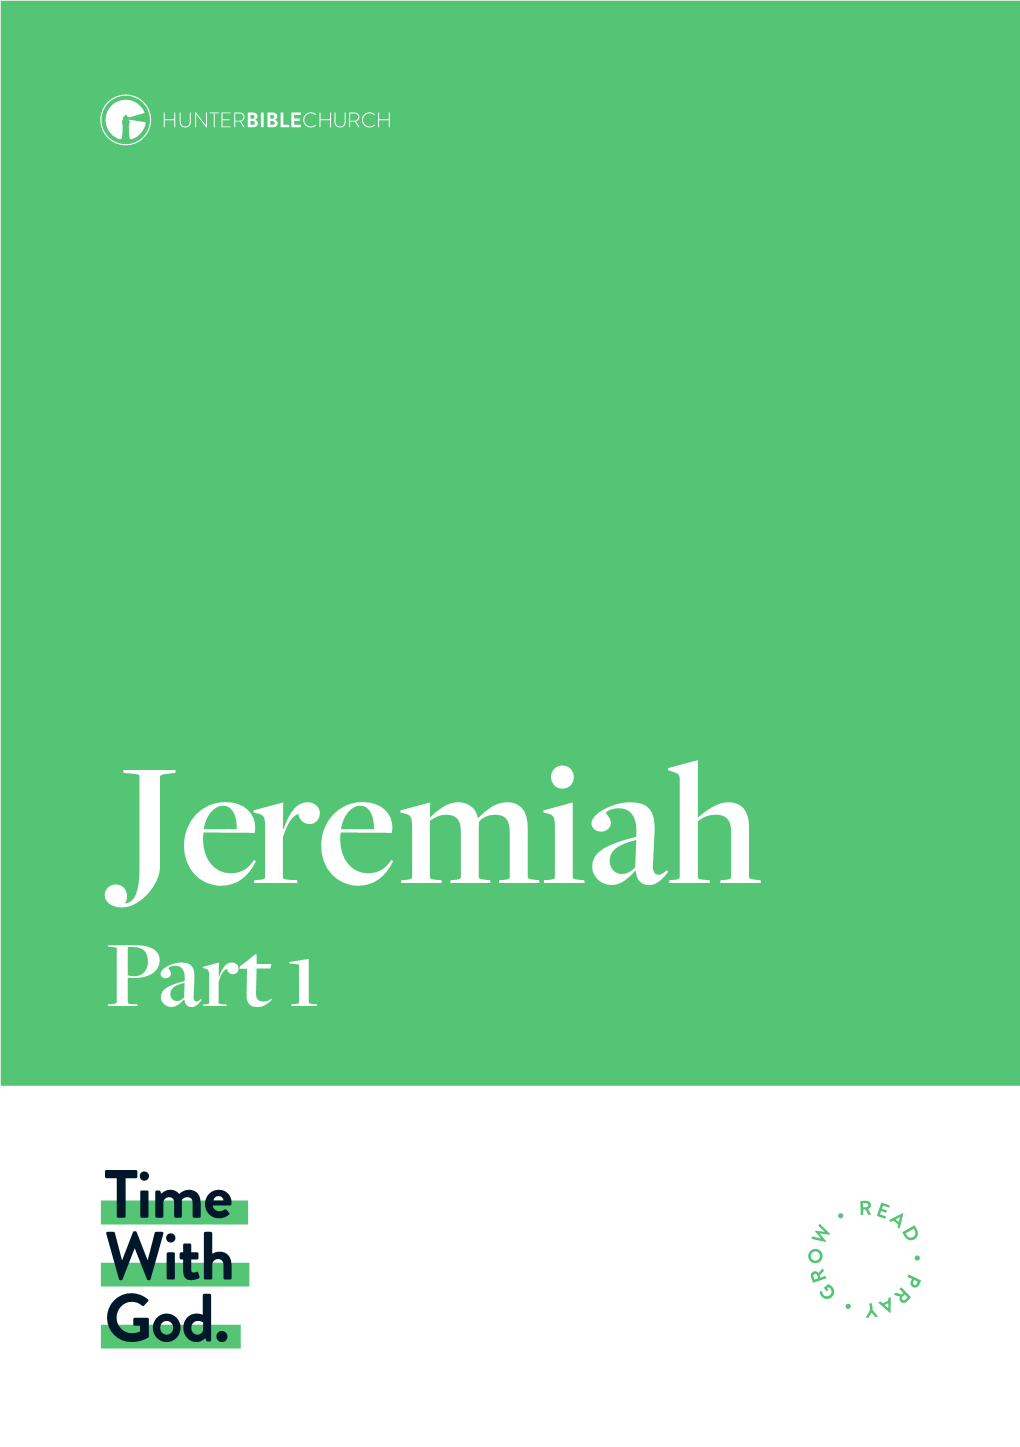 Download the Time with God: Jeremiah